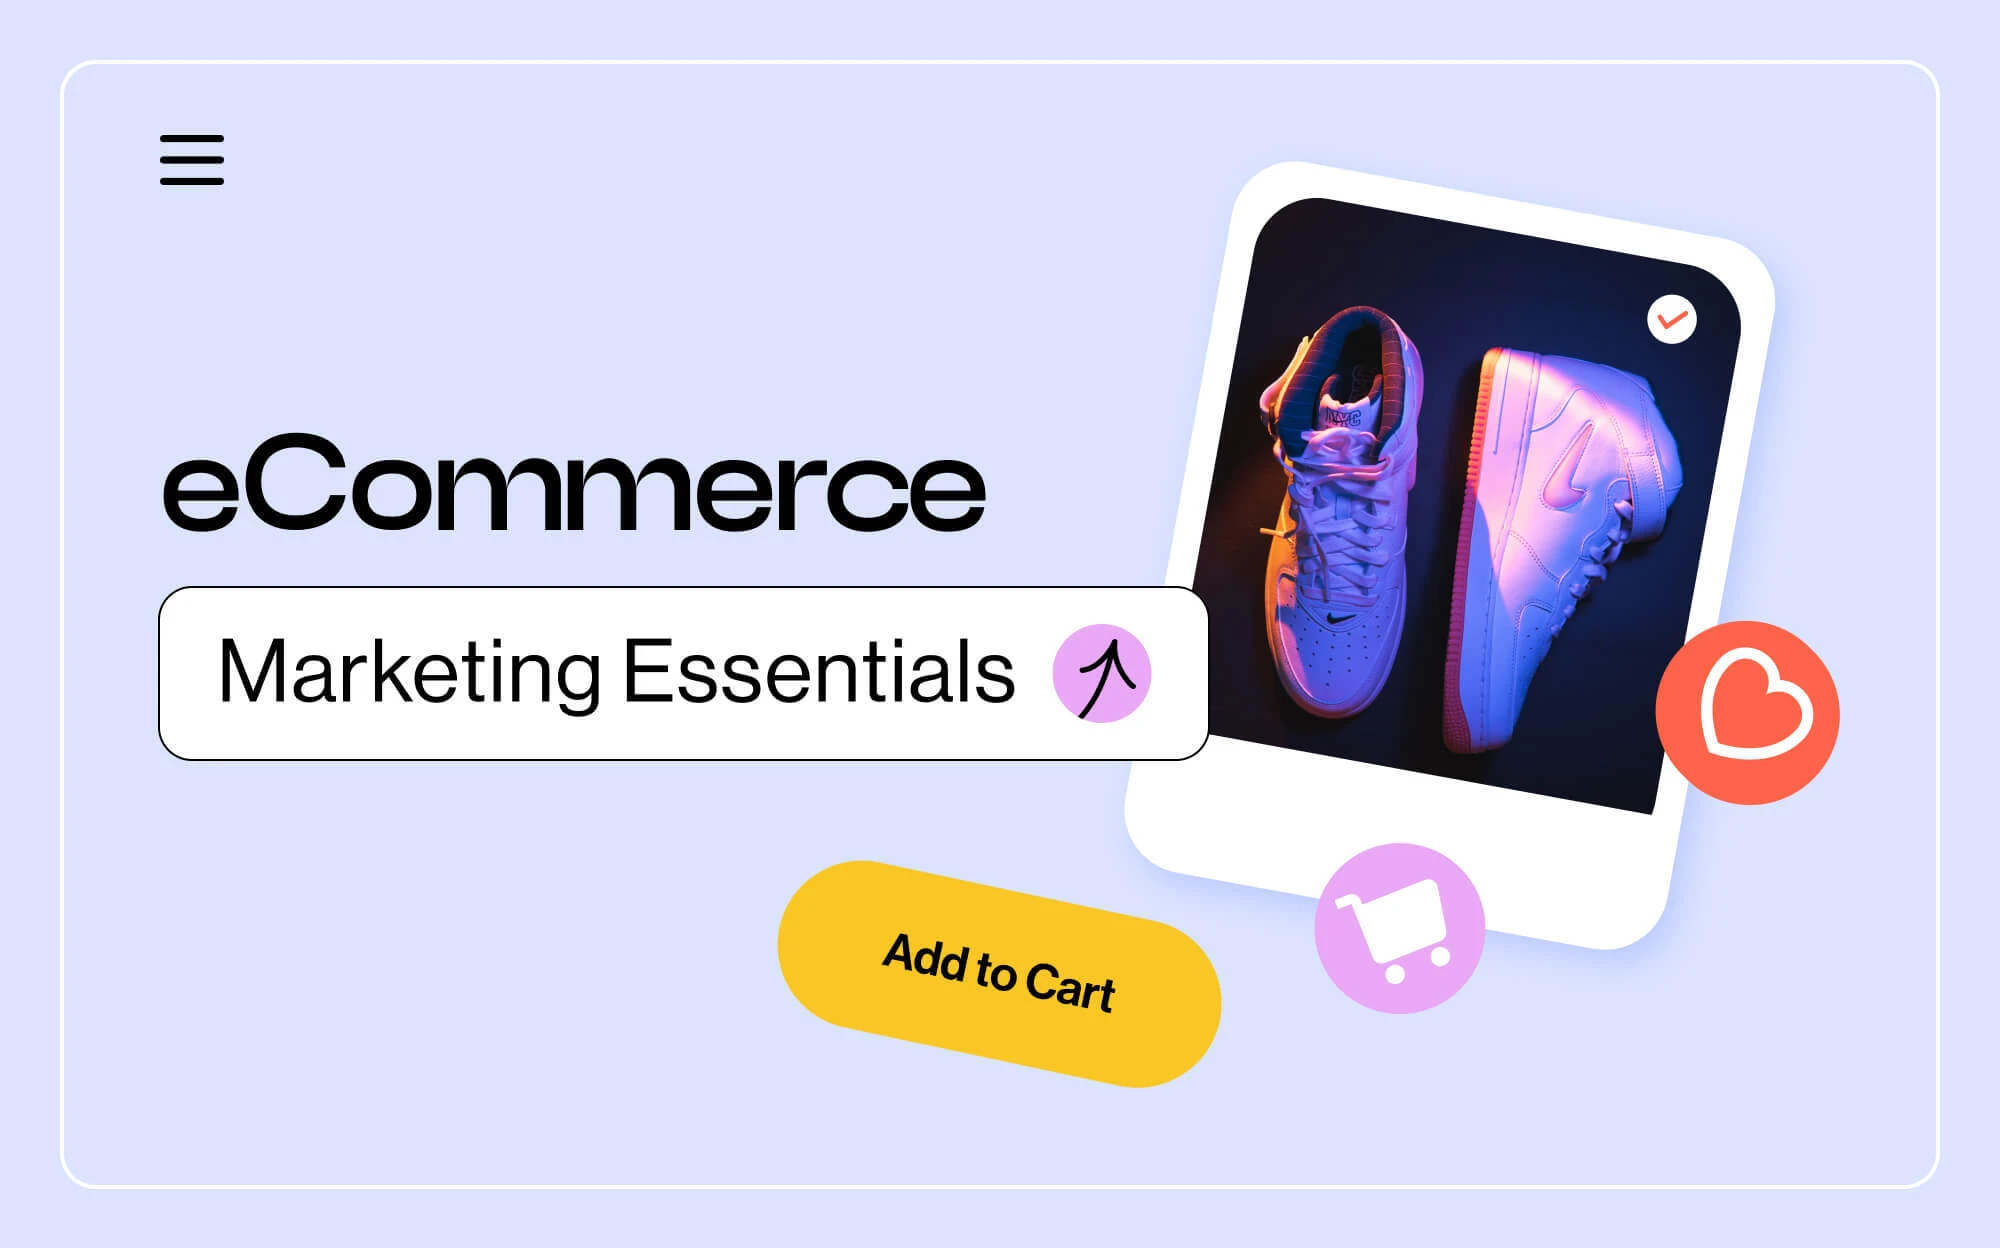 5 eCommerce Marketing Essentials to Increase Your Sales